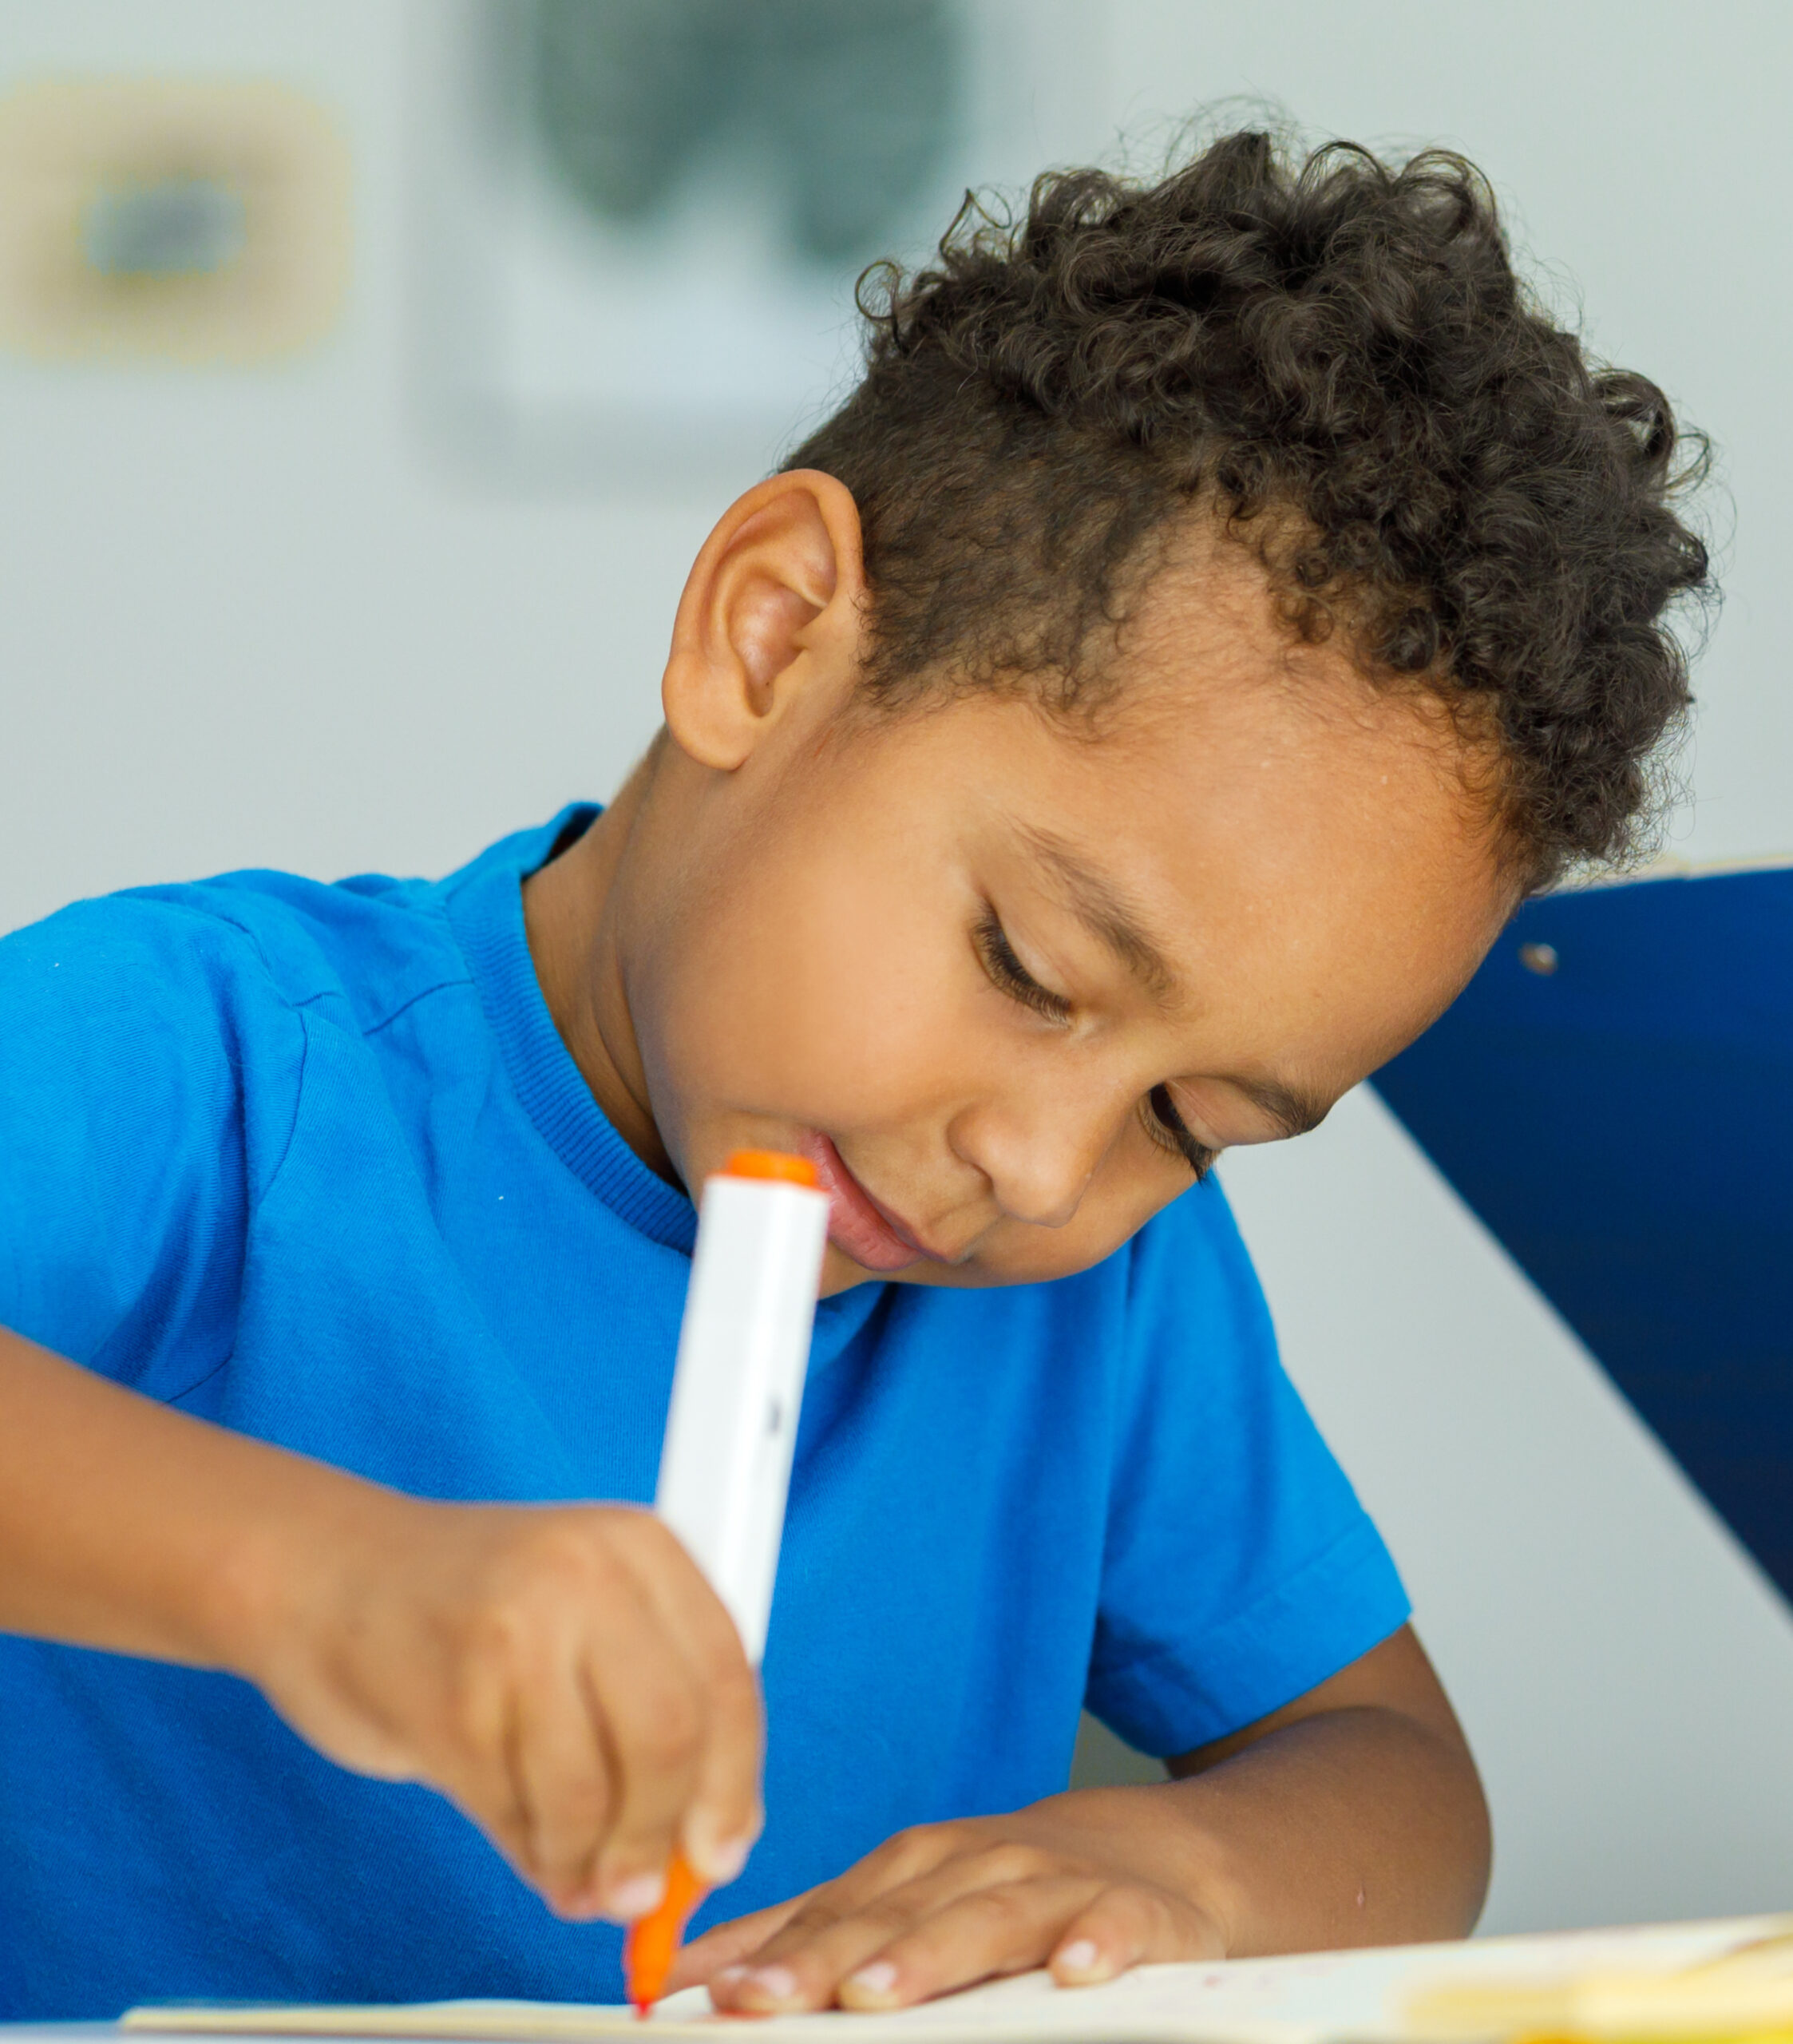 Young child working on holding and using a marker